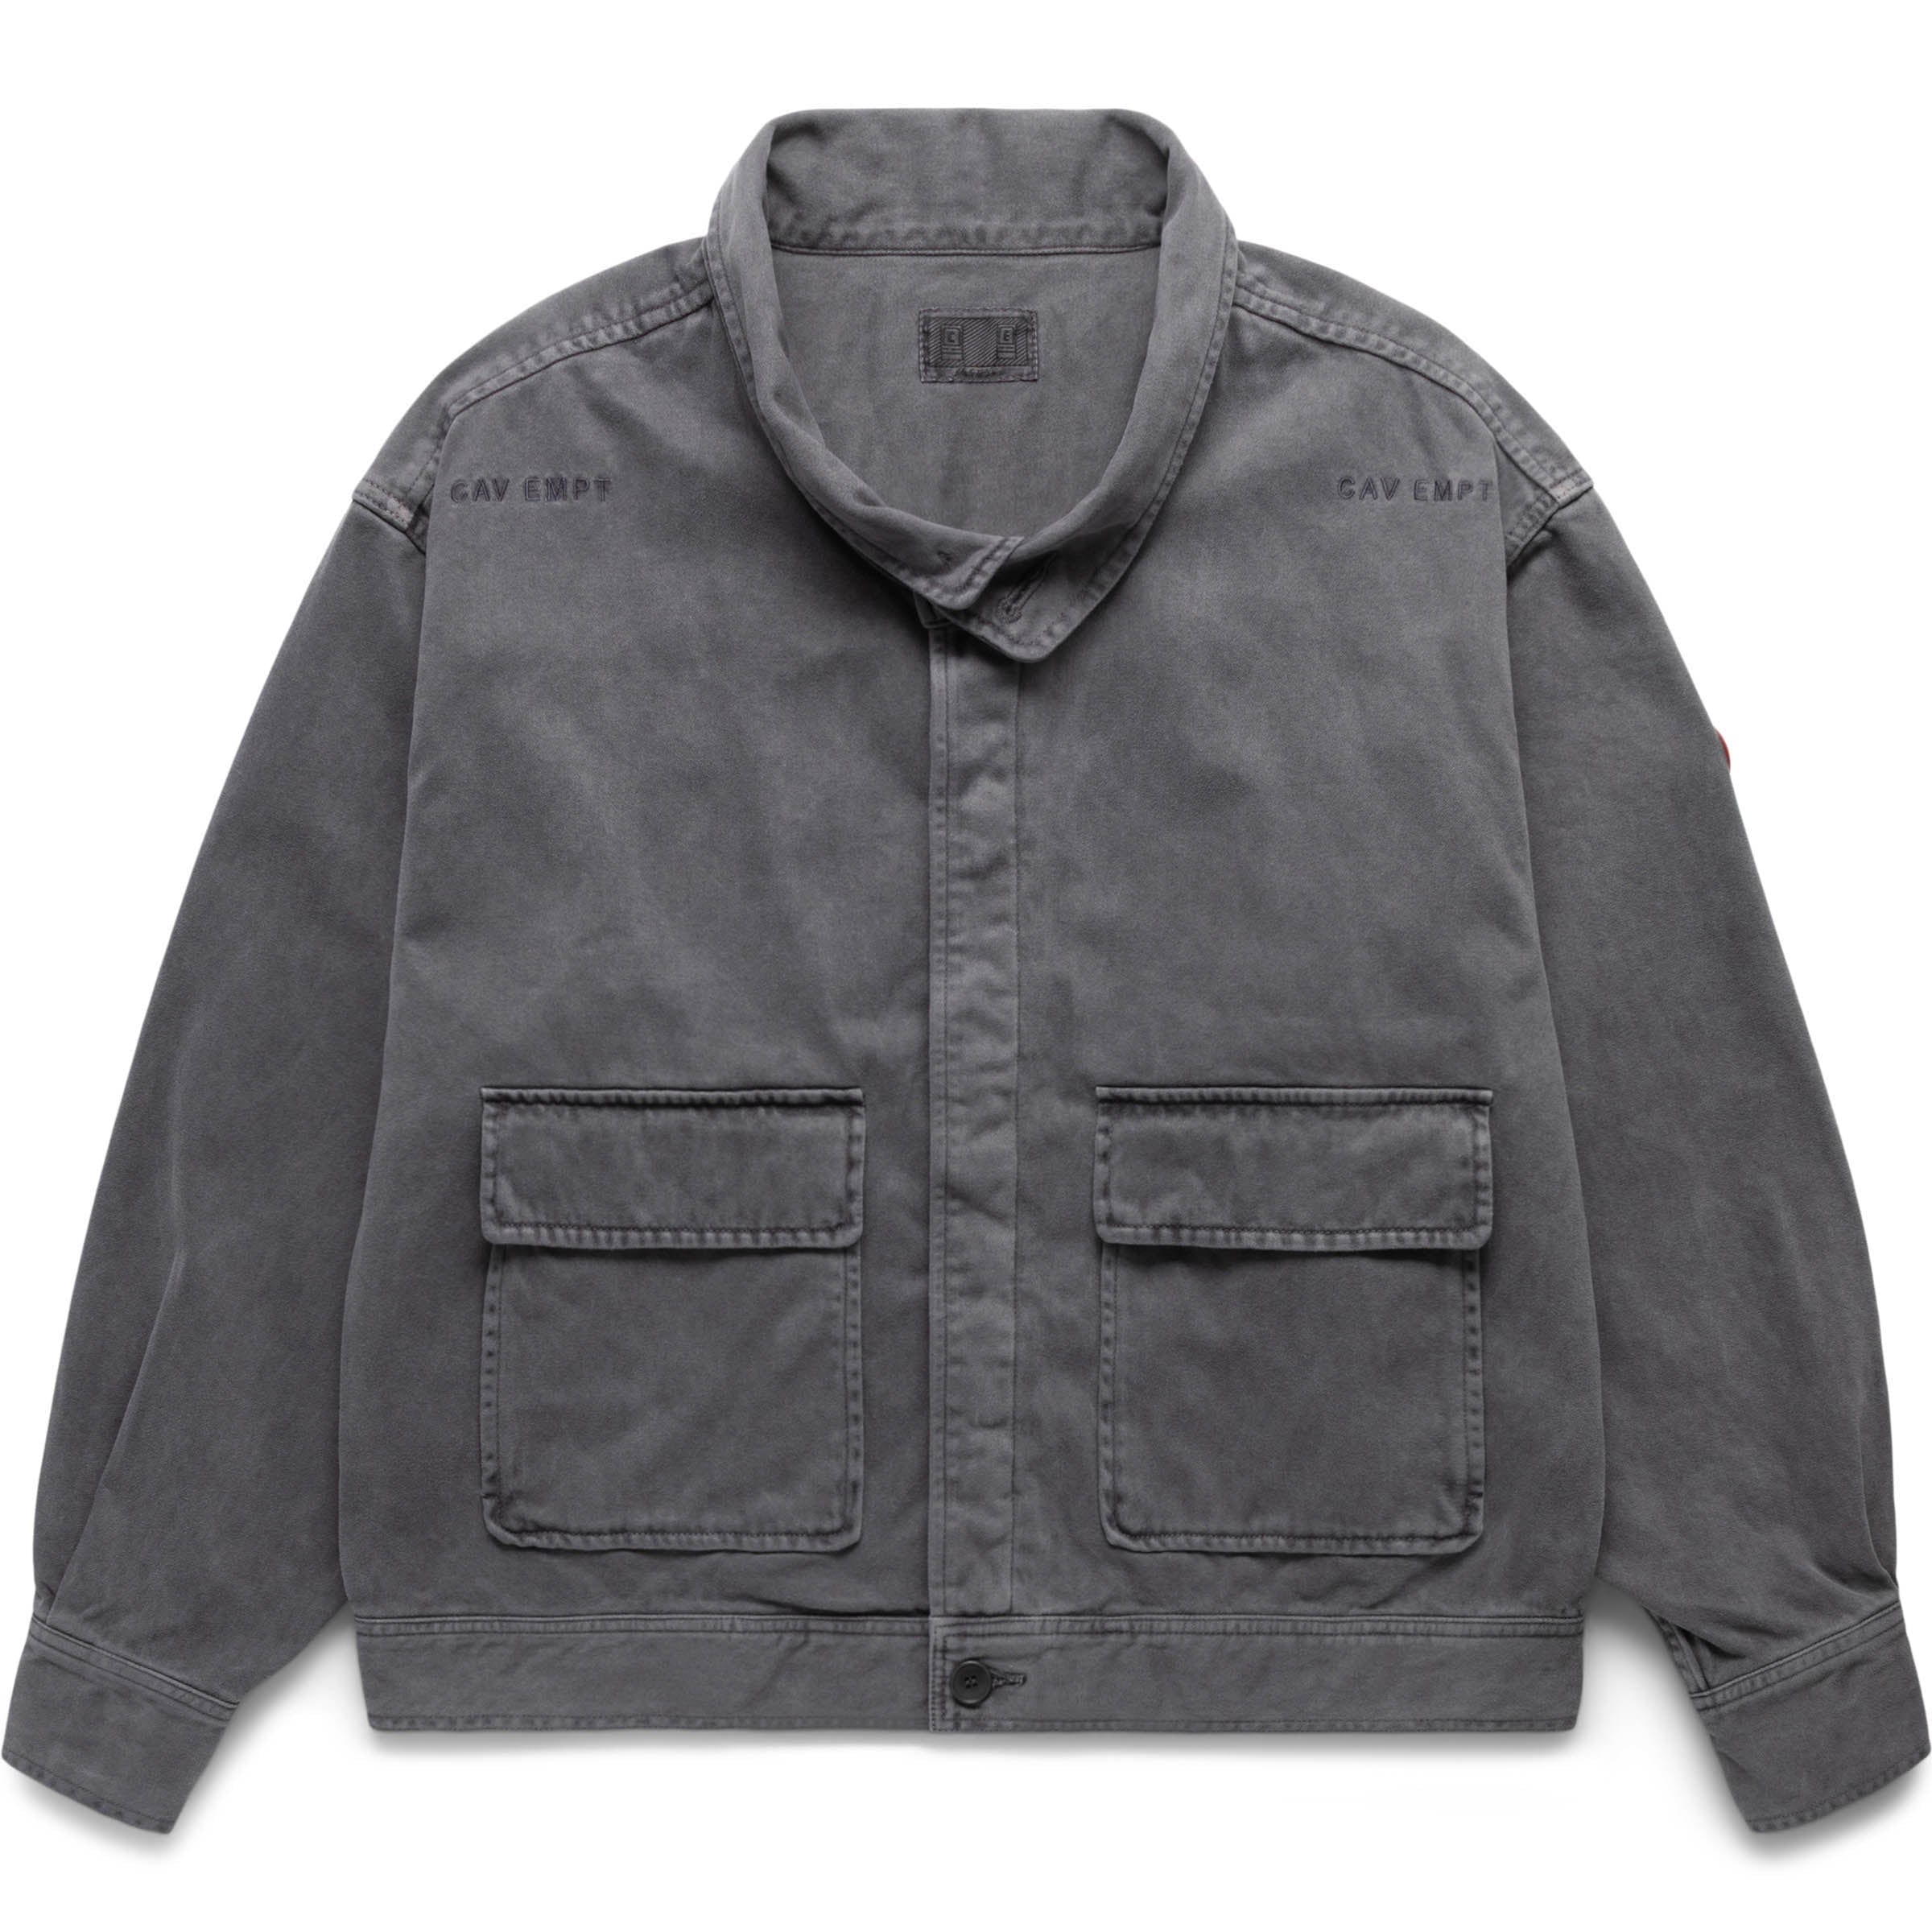 c.e cavempt WOOL BUTTON COLLARED JACKET - ブルゾン